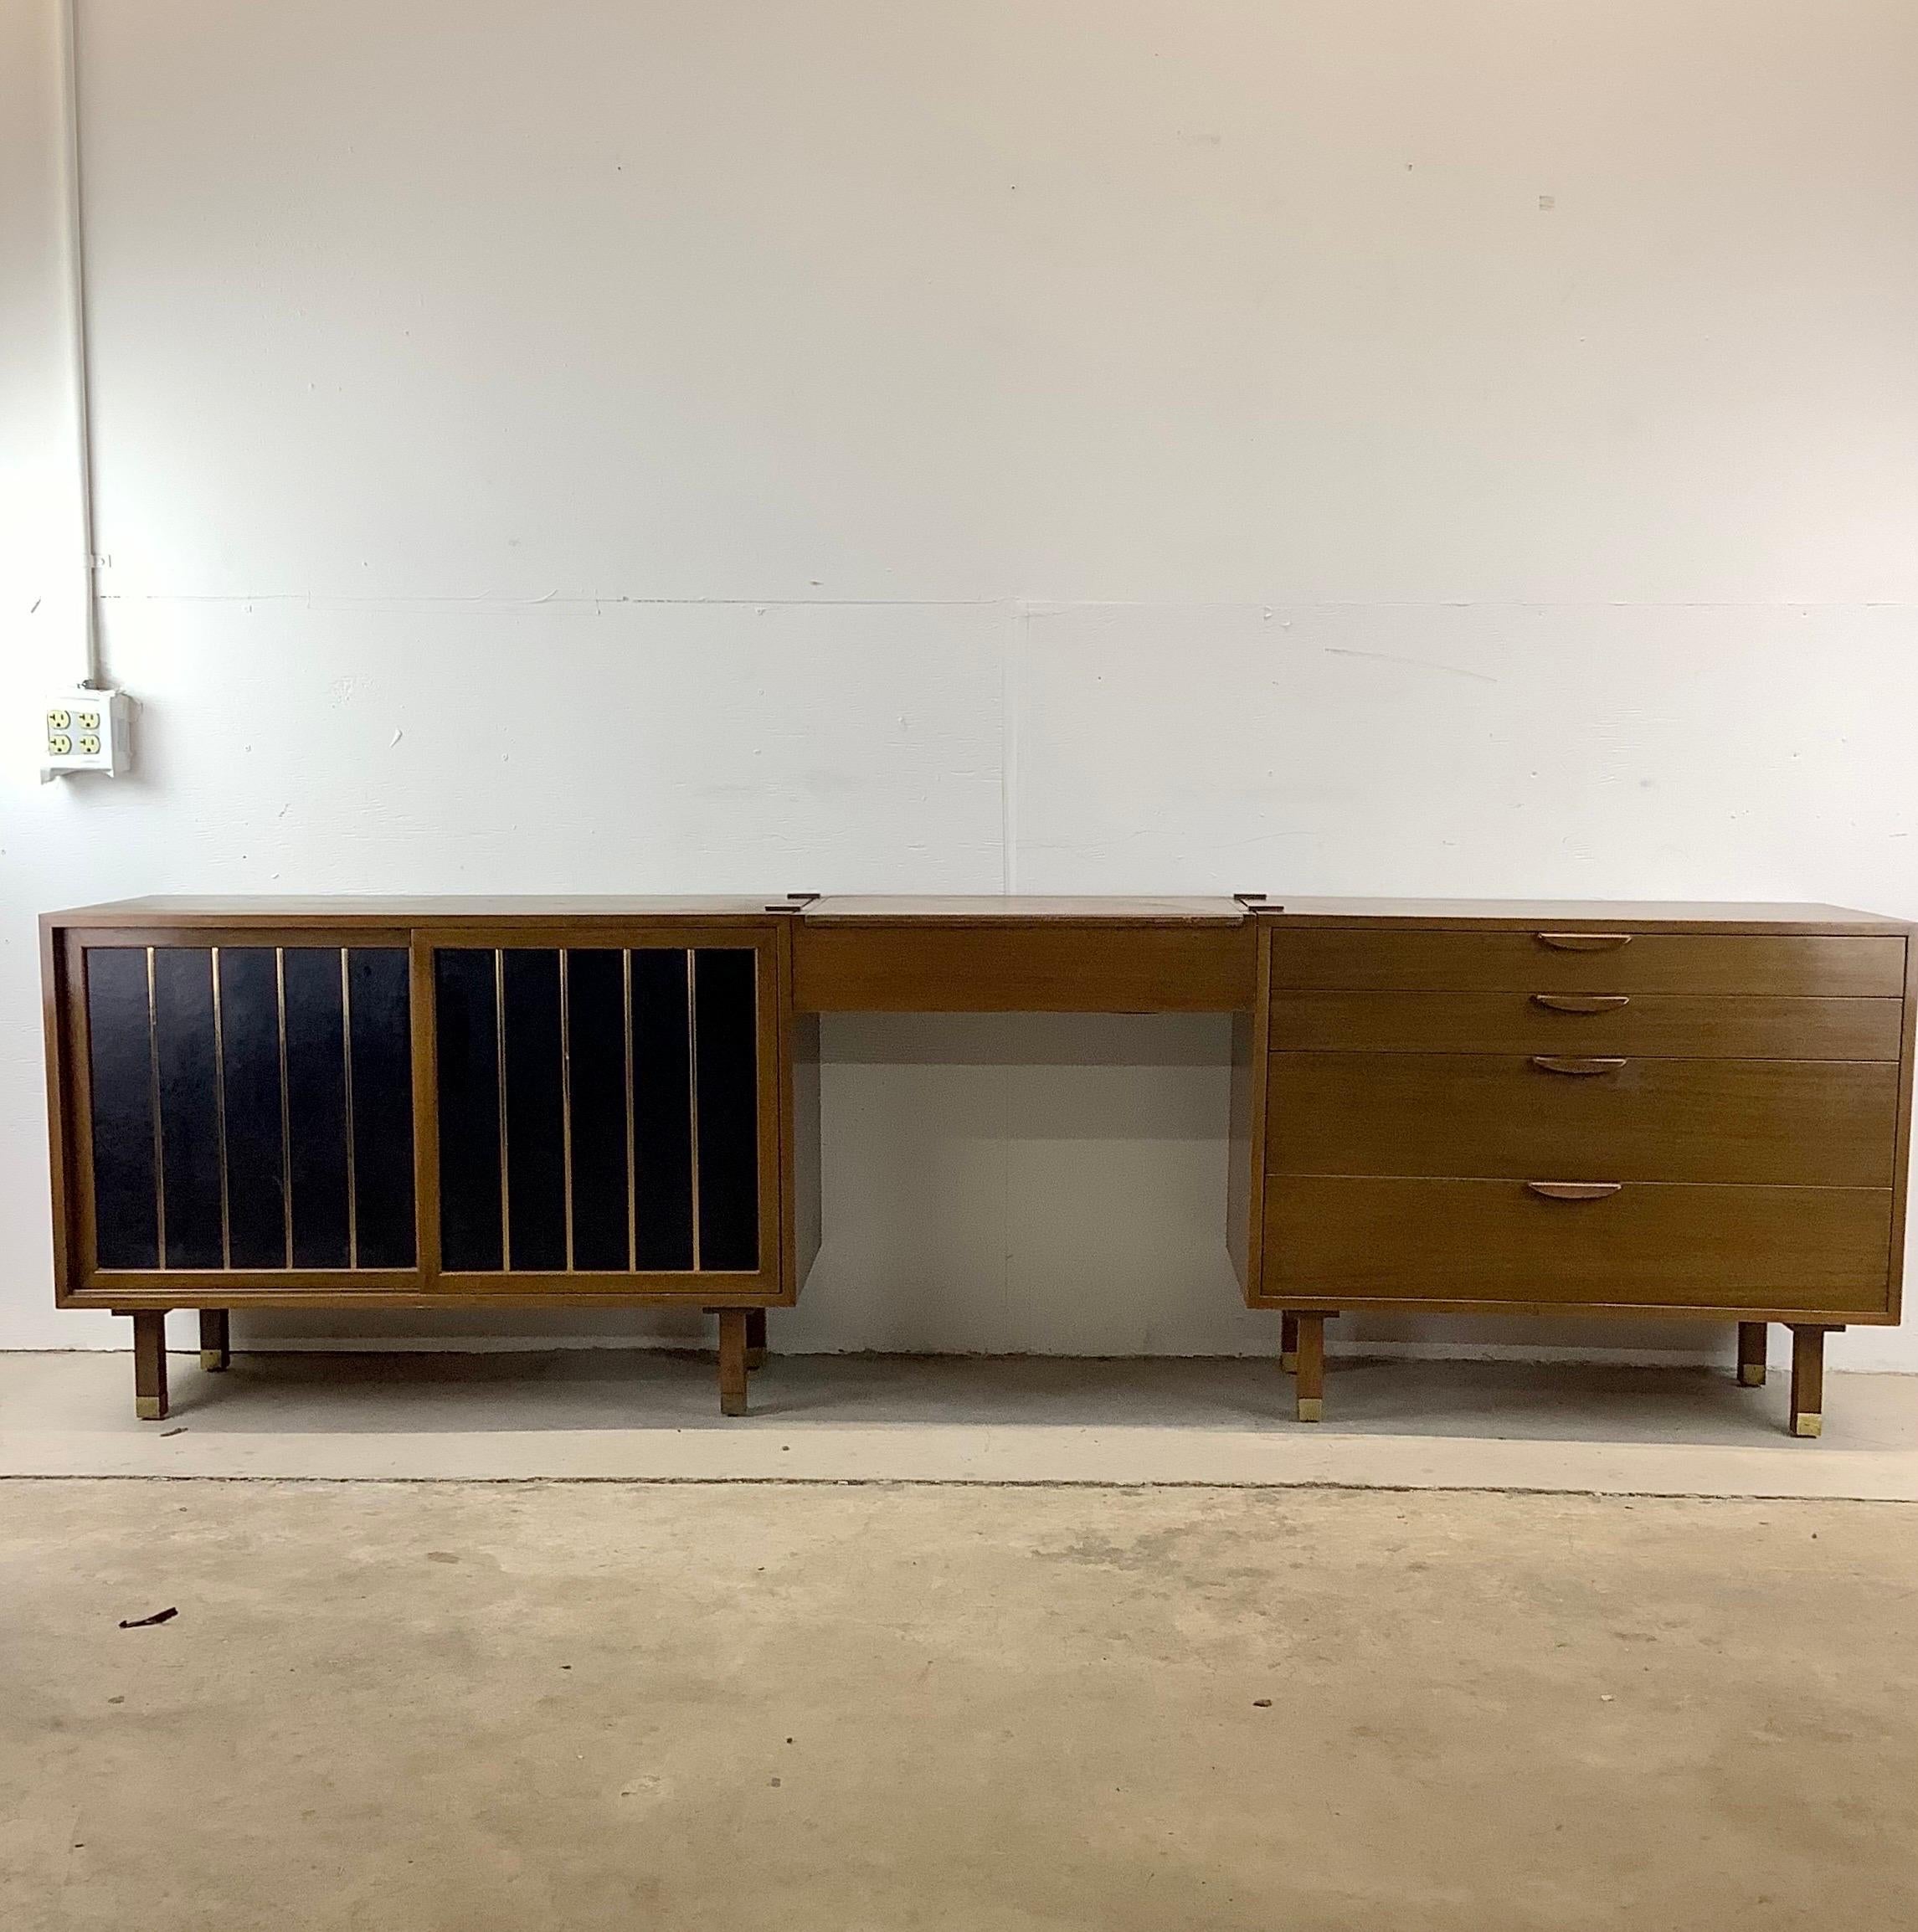 This impressive mid-century dresser set from Harvard Probber (signed) includes a four drawer dresser, lift top vanity, and sliding front cabinet. The modular set can be organized in any way you like. Mahogany finish throughout is complimented nicely